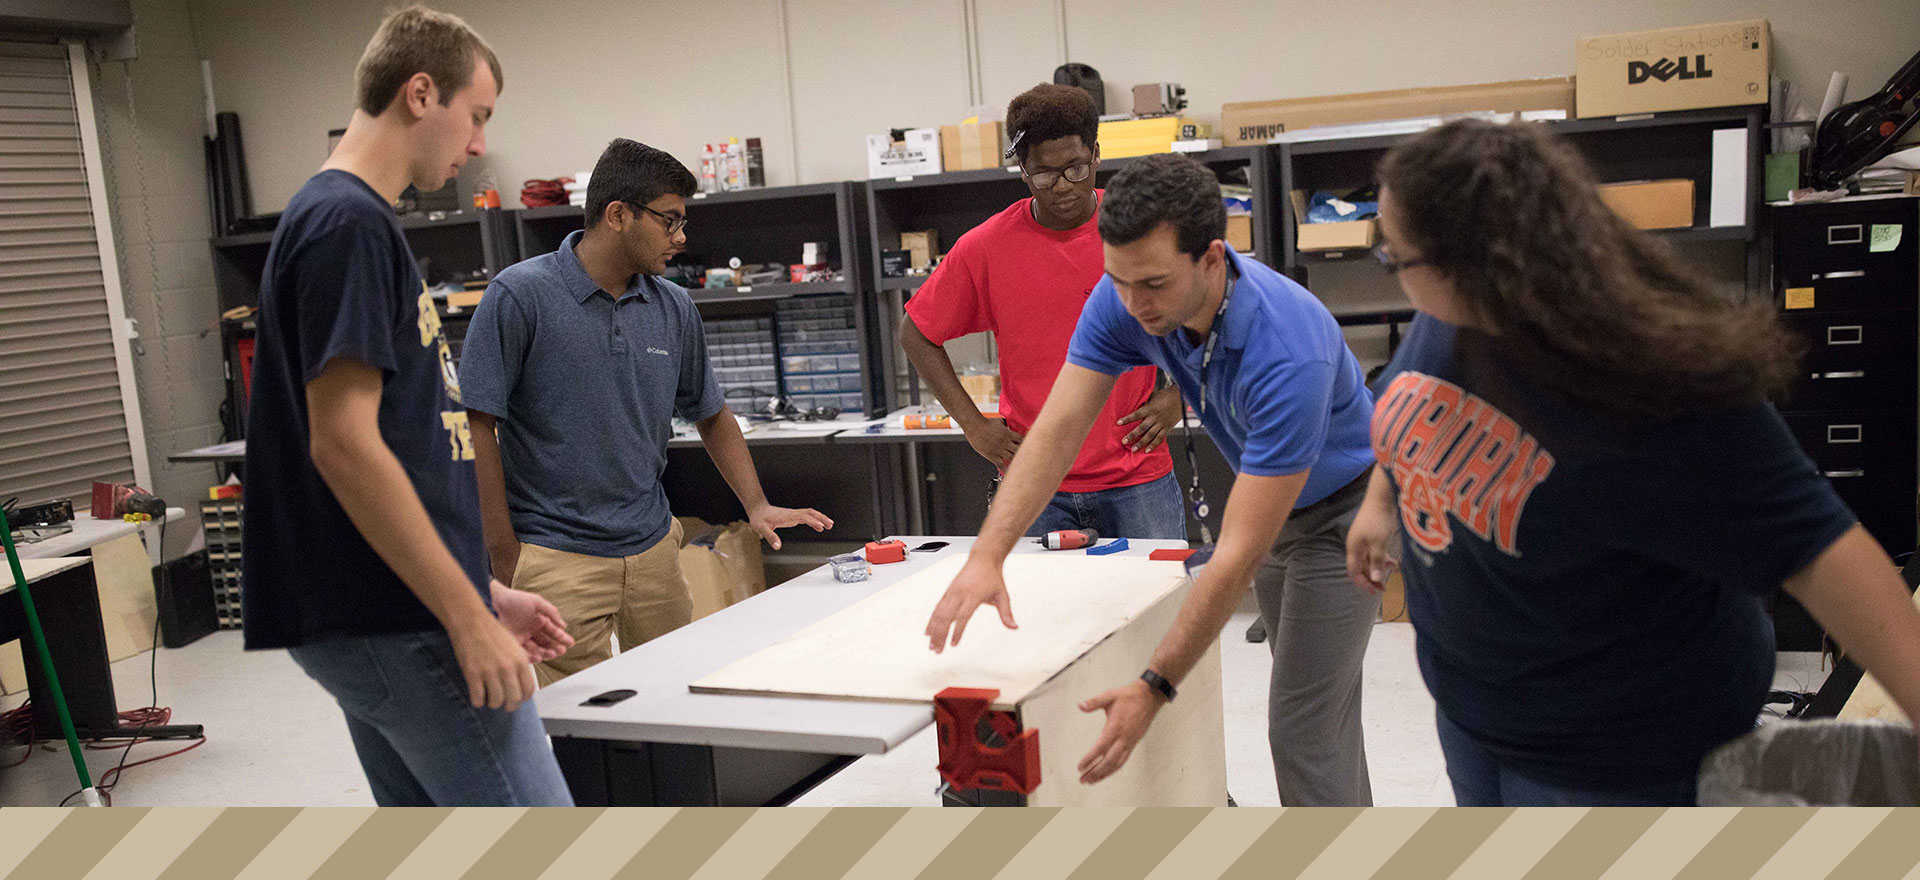 Four students gathered around their mentor, who is demonstrating a wood clamp on a box in the lab.